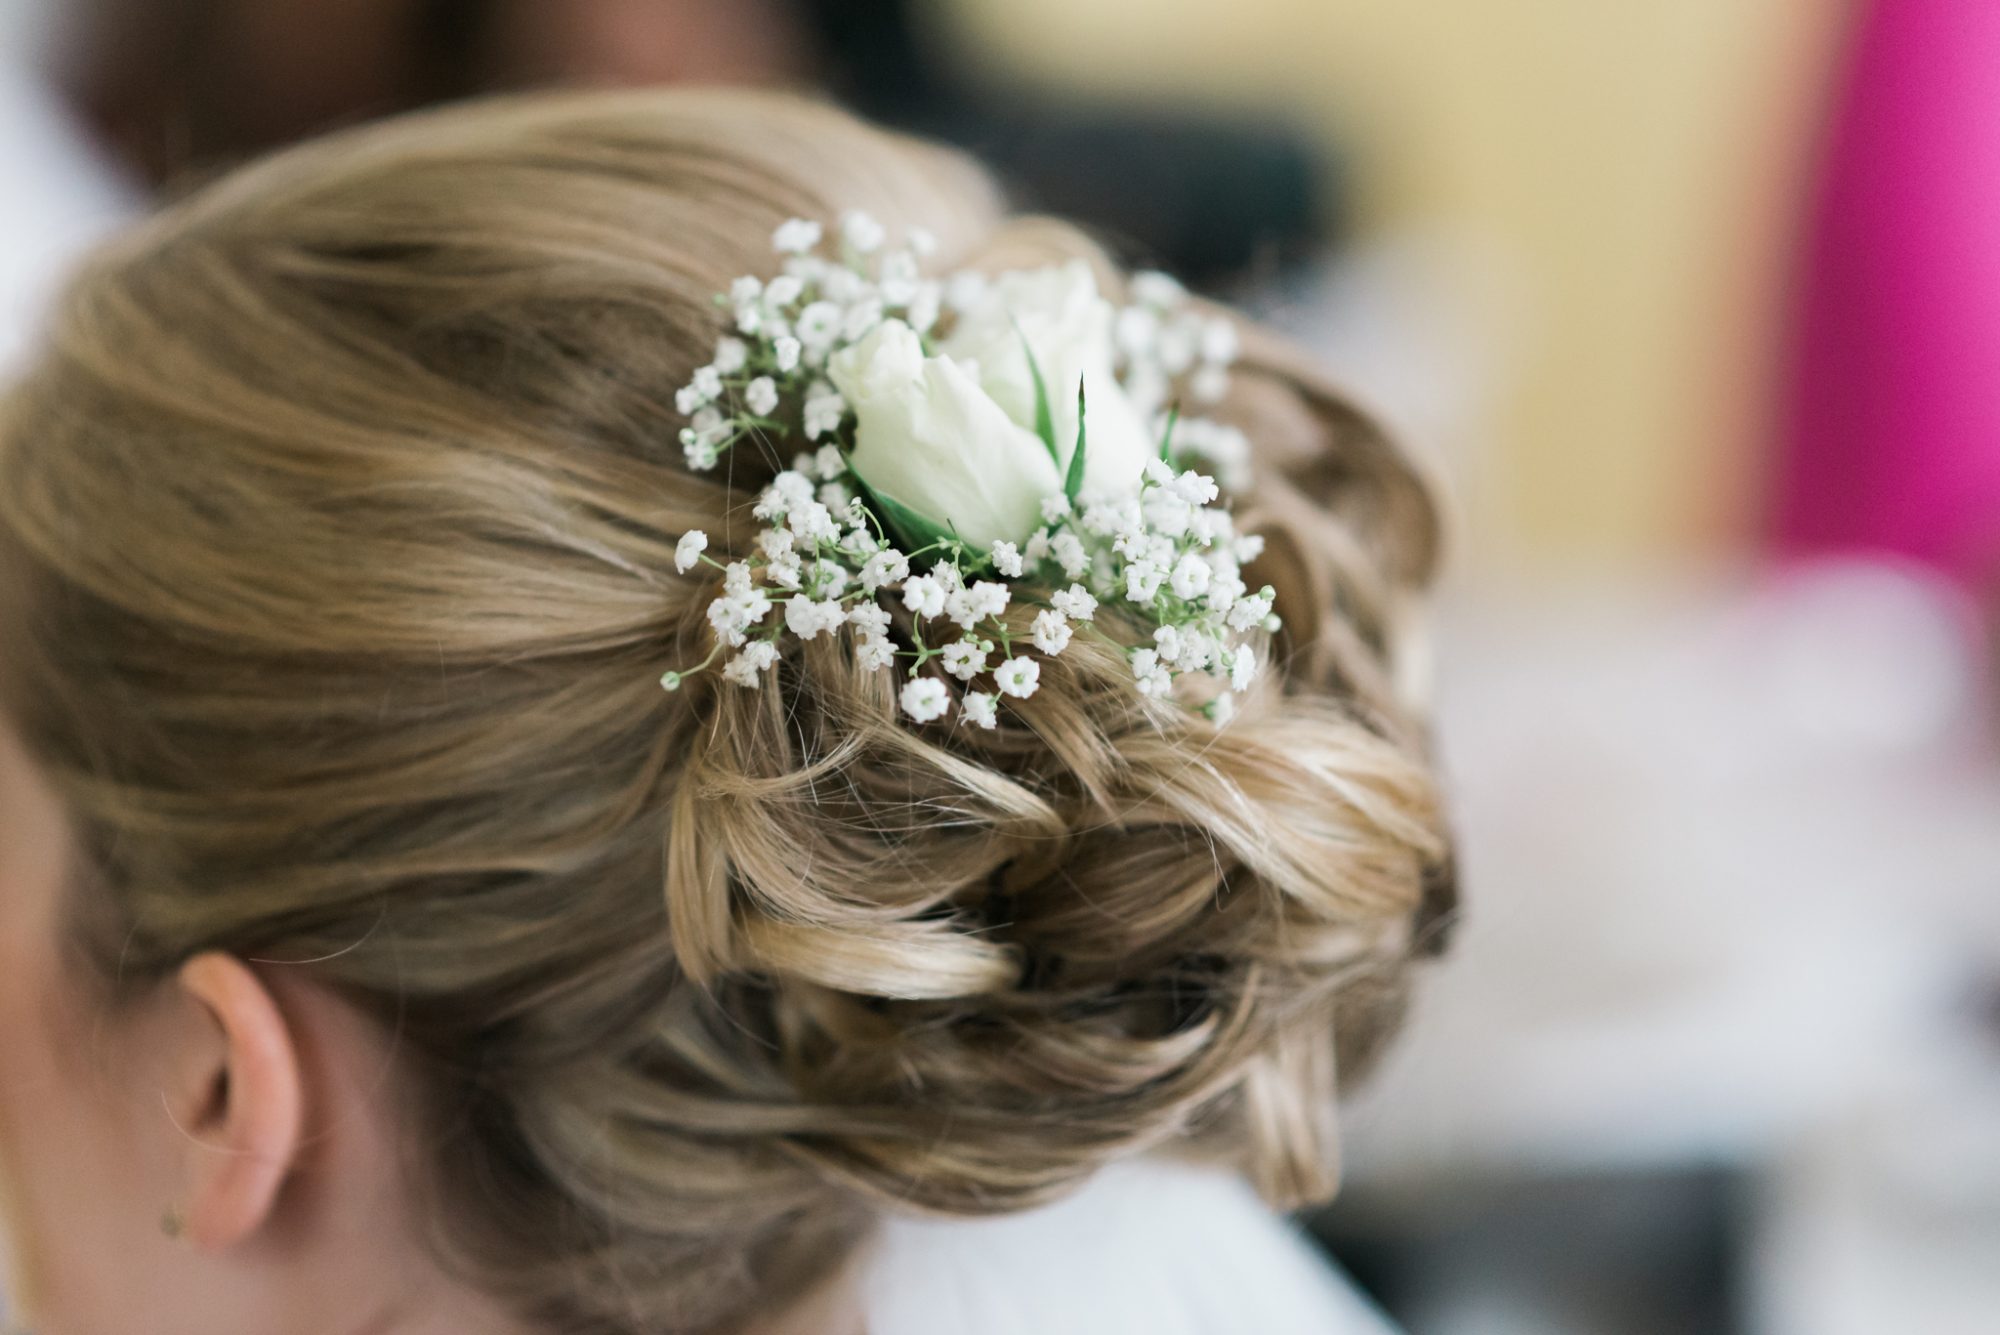 A sailing-themed bride with a flower in her hair at her Key West wedding.